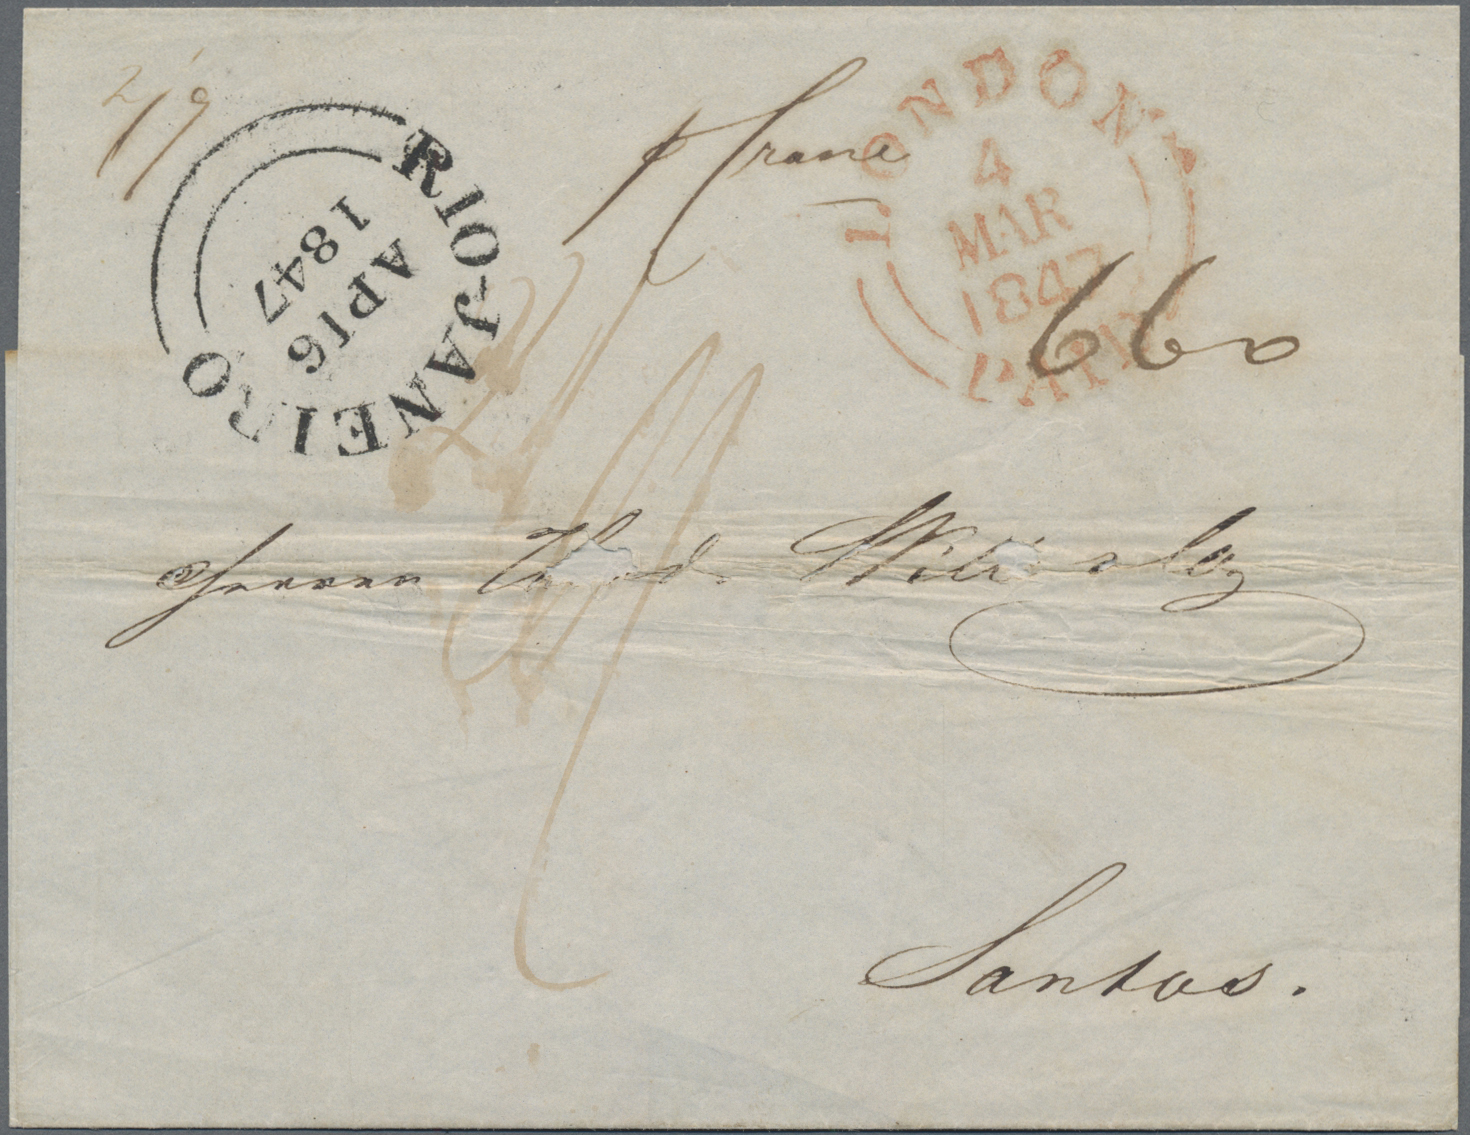 Lot 03759 - Brasilien - Vorphila / Stampless Covers  -  Auktionshaus Christoph Gärtner GmbH & Co. KG 55th AUCTION - Day 2